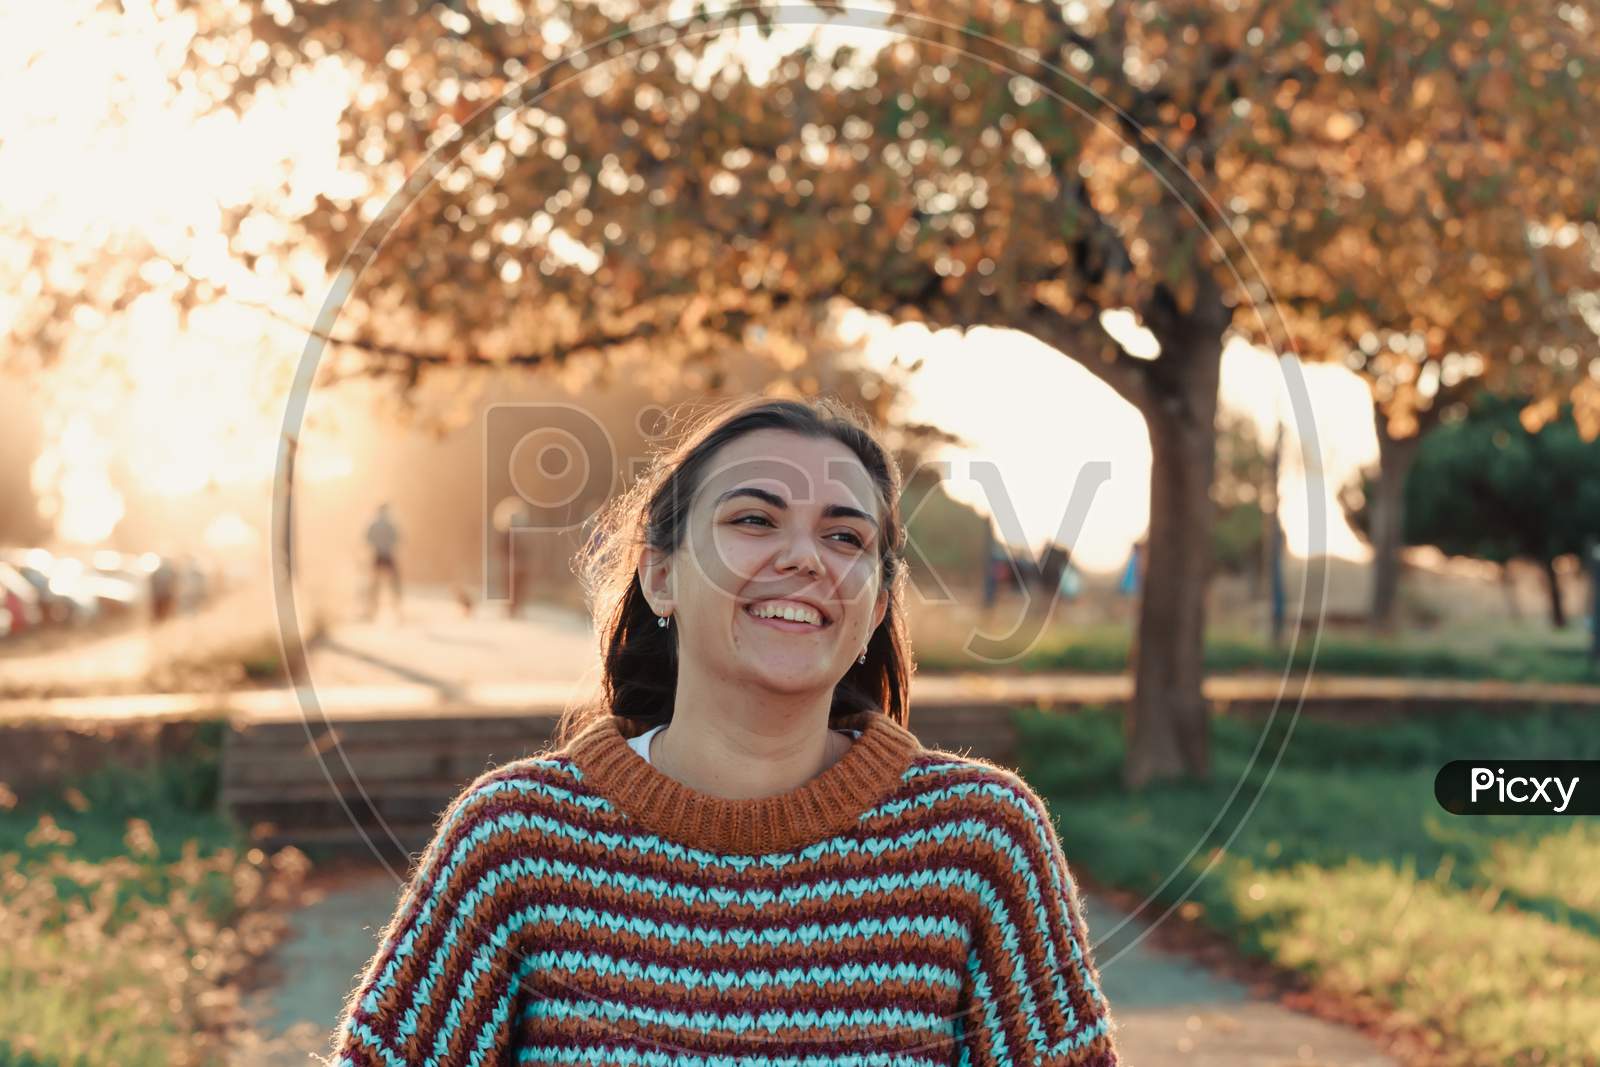 Young Woman Smiling During A Colorful Sunset In A National Park While Wearing An Autumnal Sweater